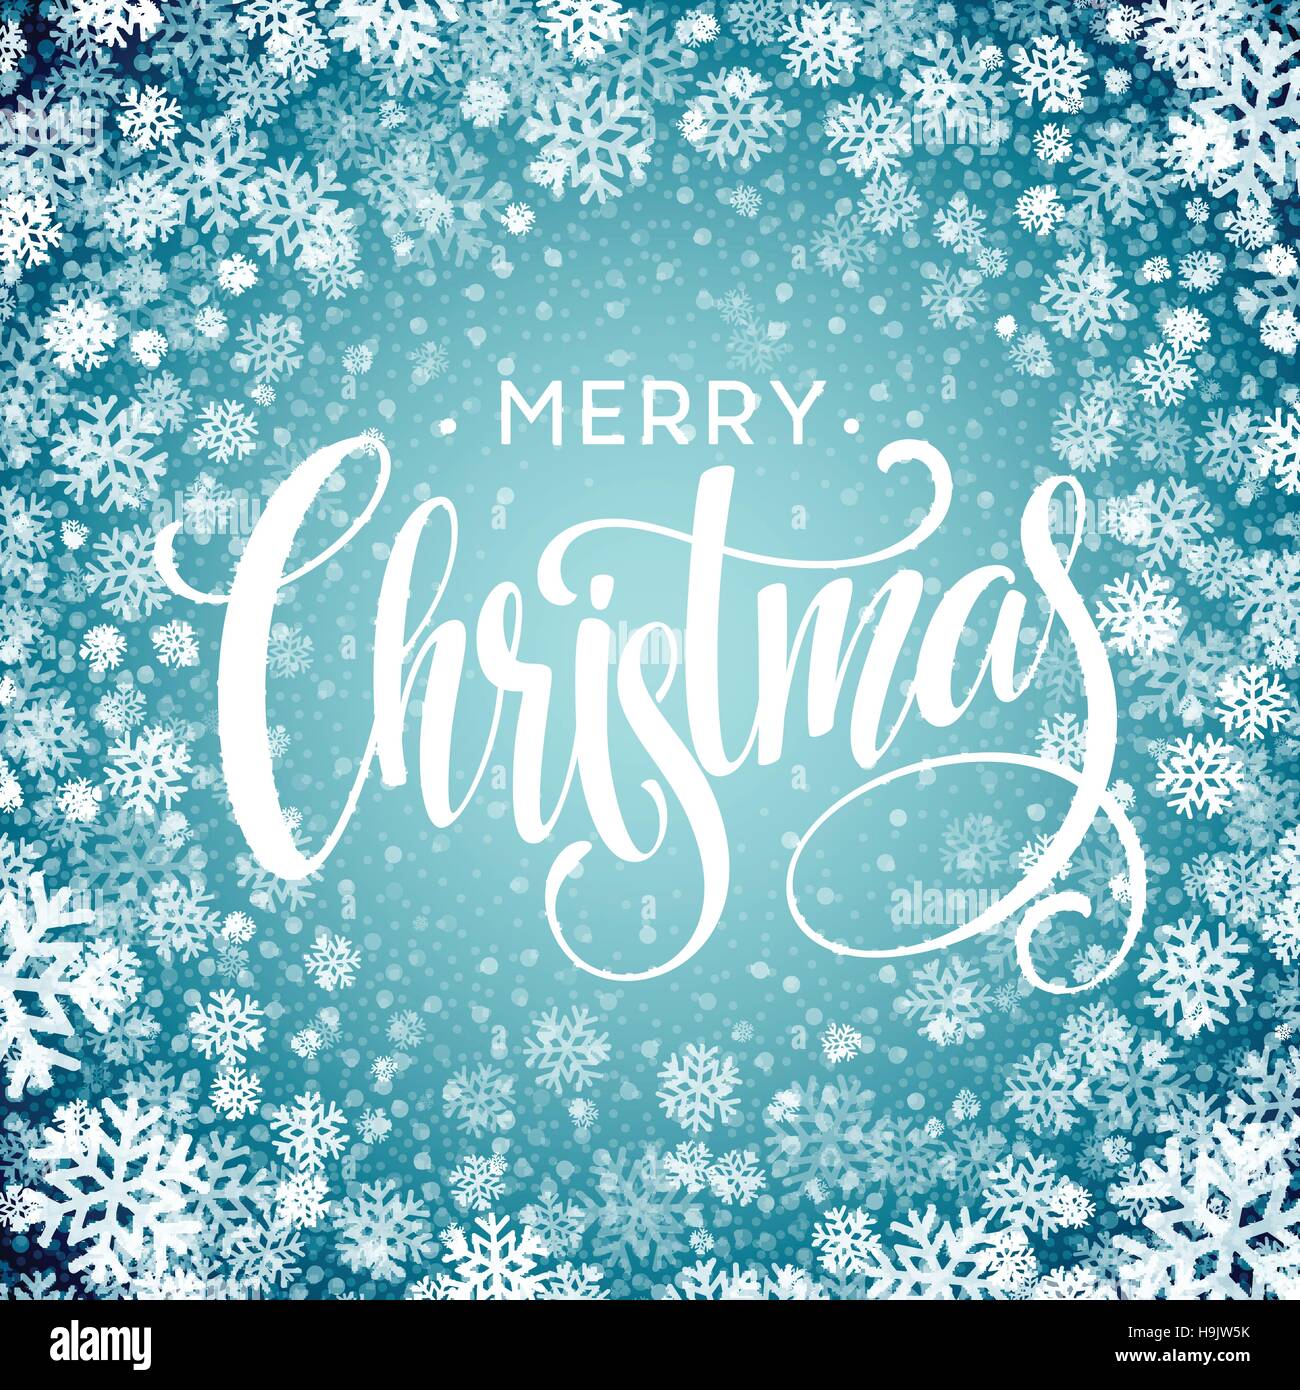 https://c8.alamy.com/comp/H9JW5K/merry-christmas-handwritten-text-on-background-with-snowflakes-vector-H9JW5K.jpg